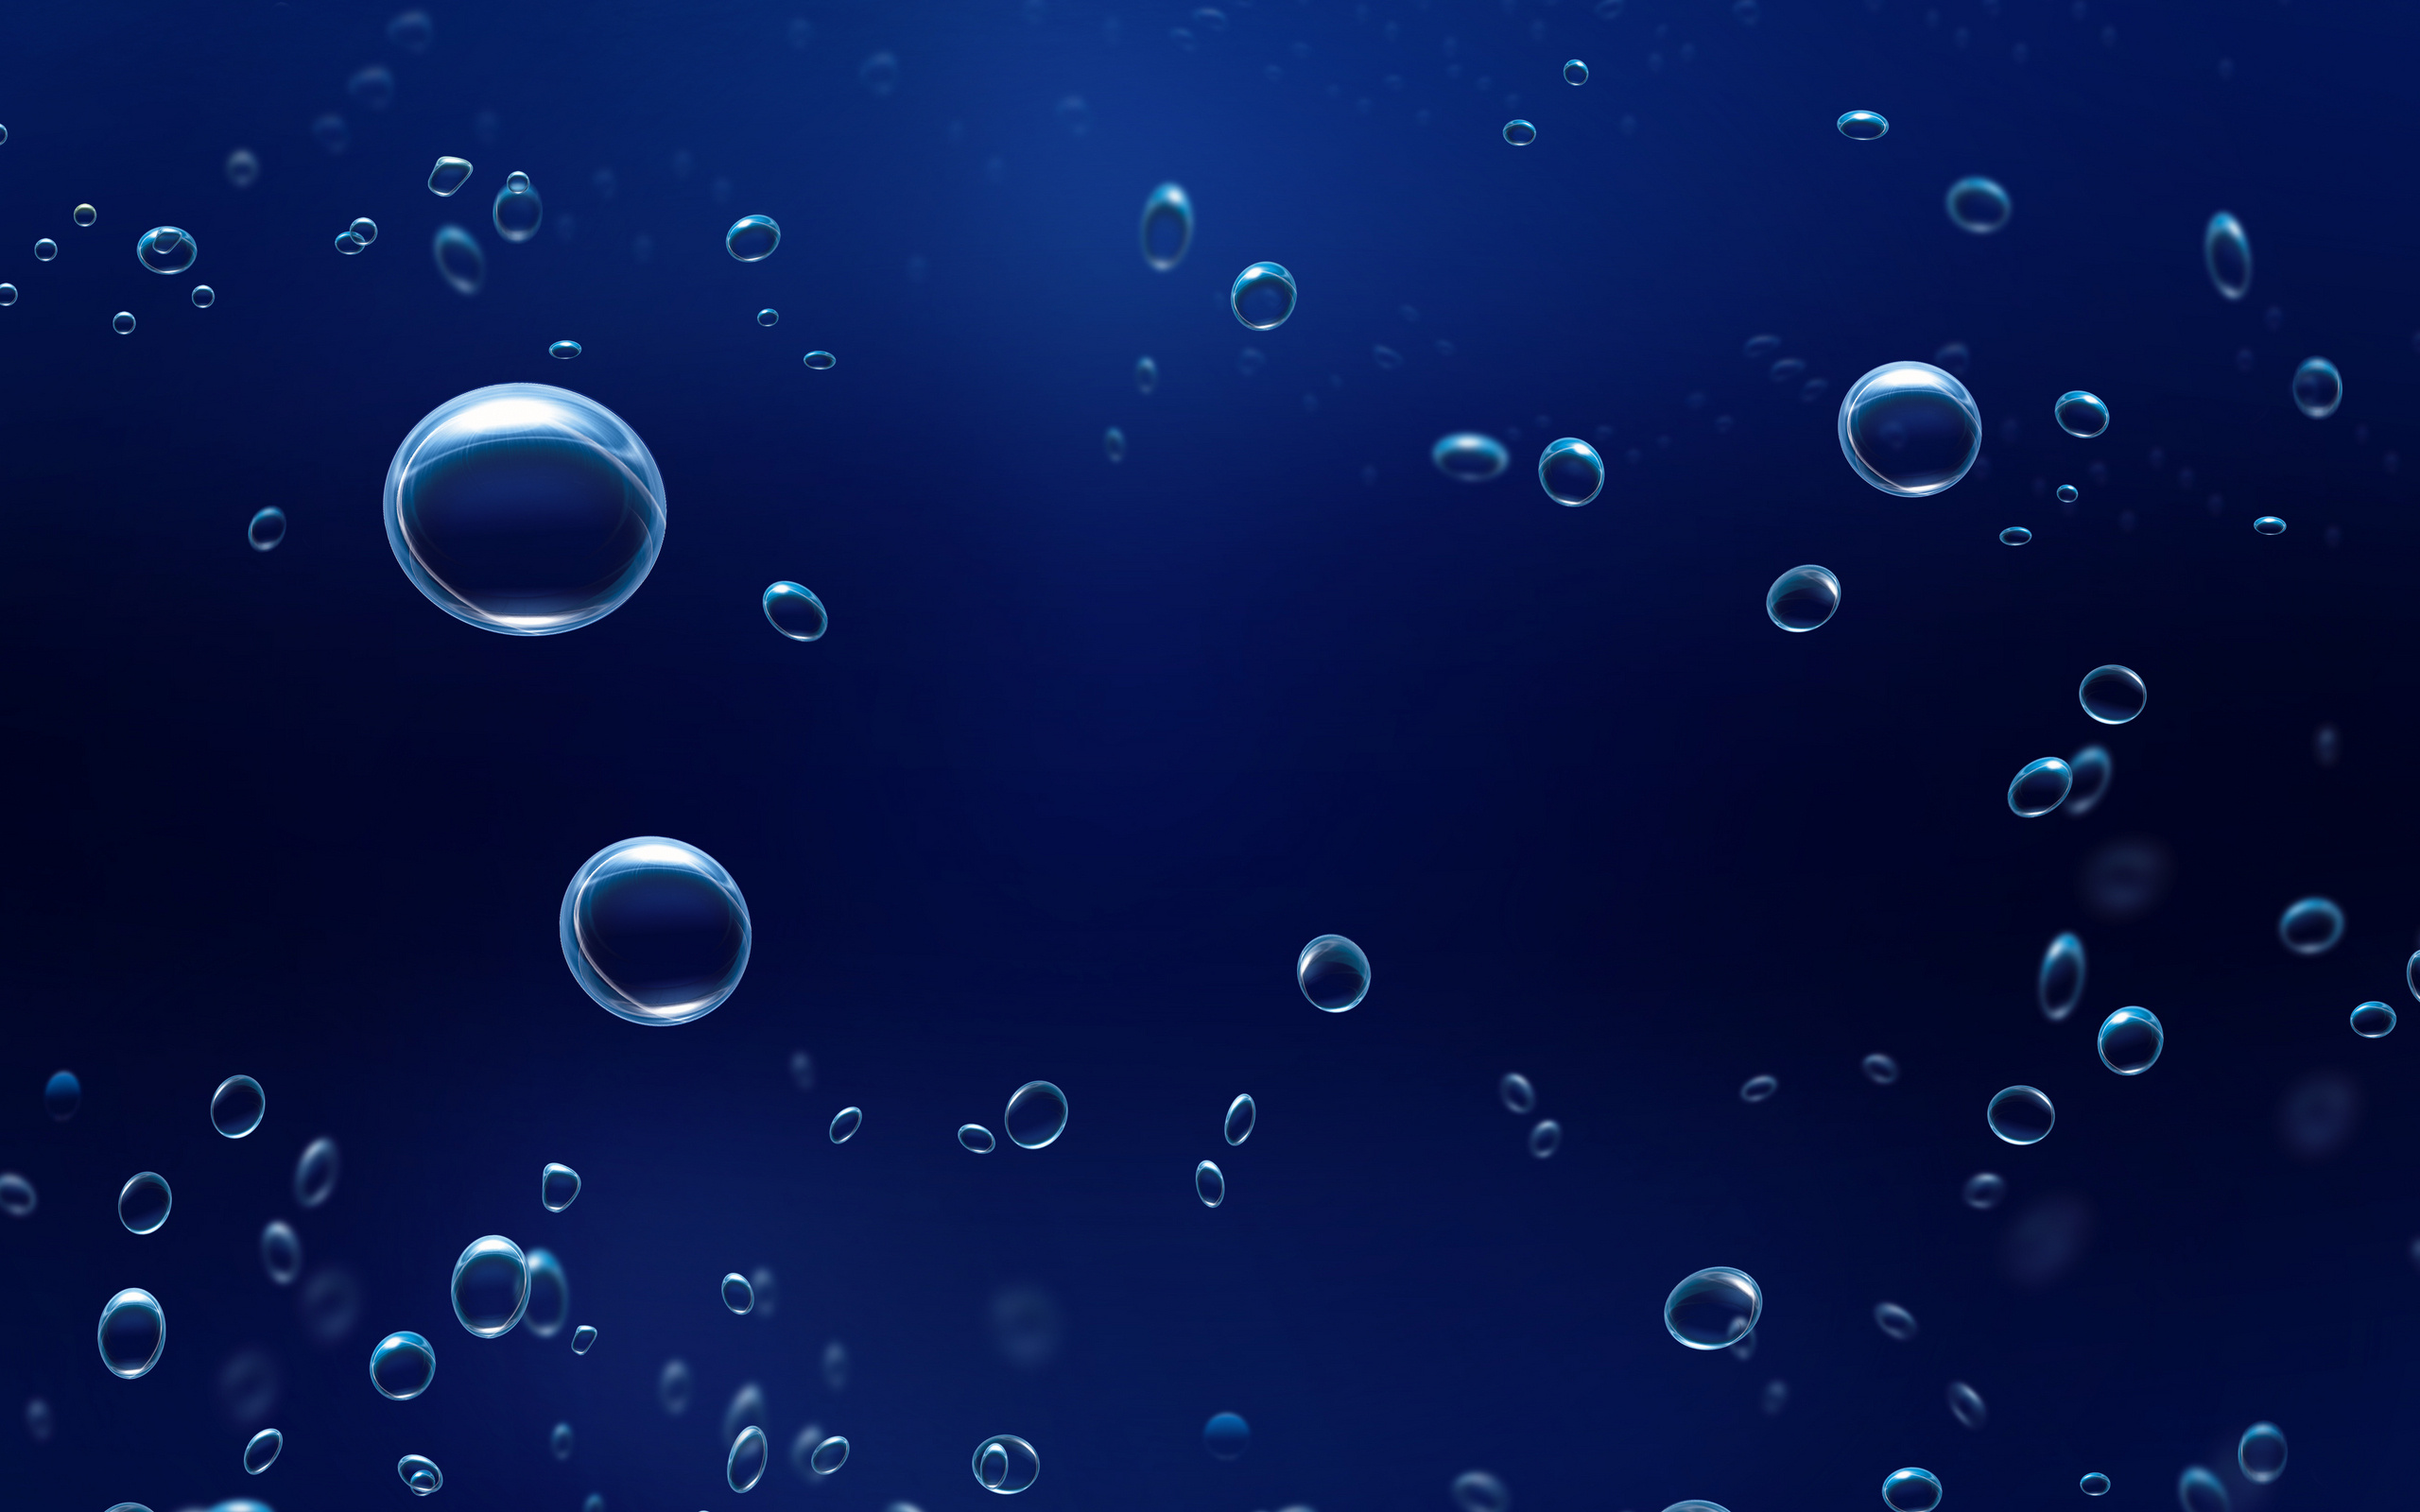 Artistic water design, PowerPoint enhancement, Bed of bubbles, Subsurface themes, Creative background use, 2560x1600 HD Desktop